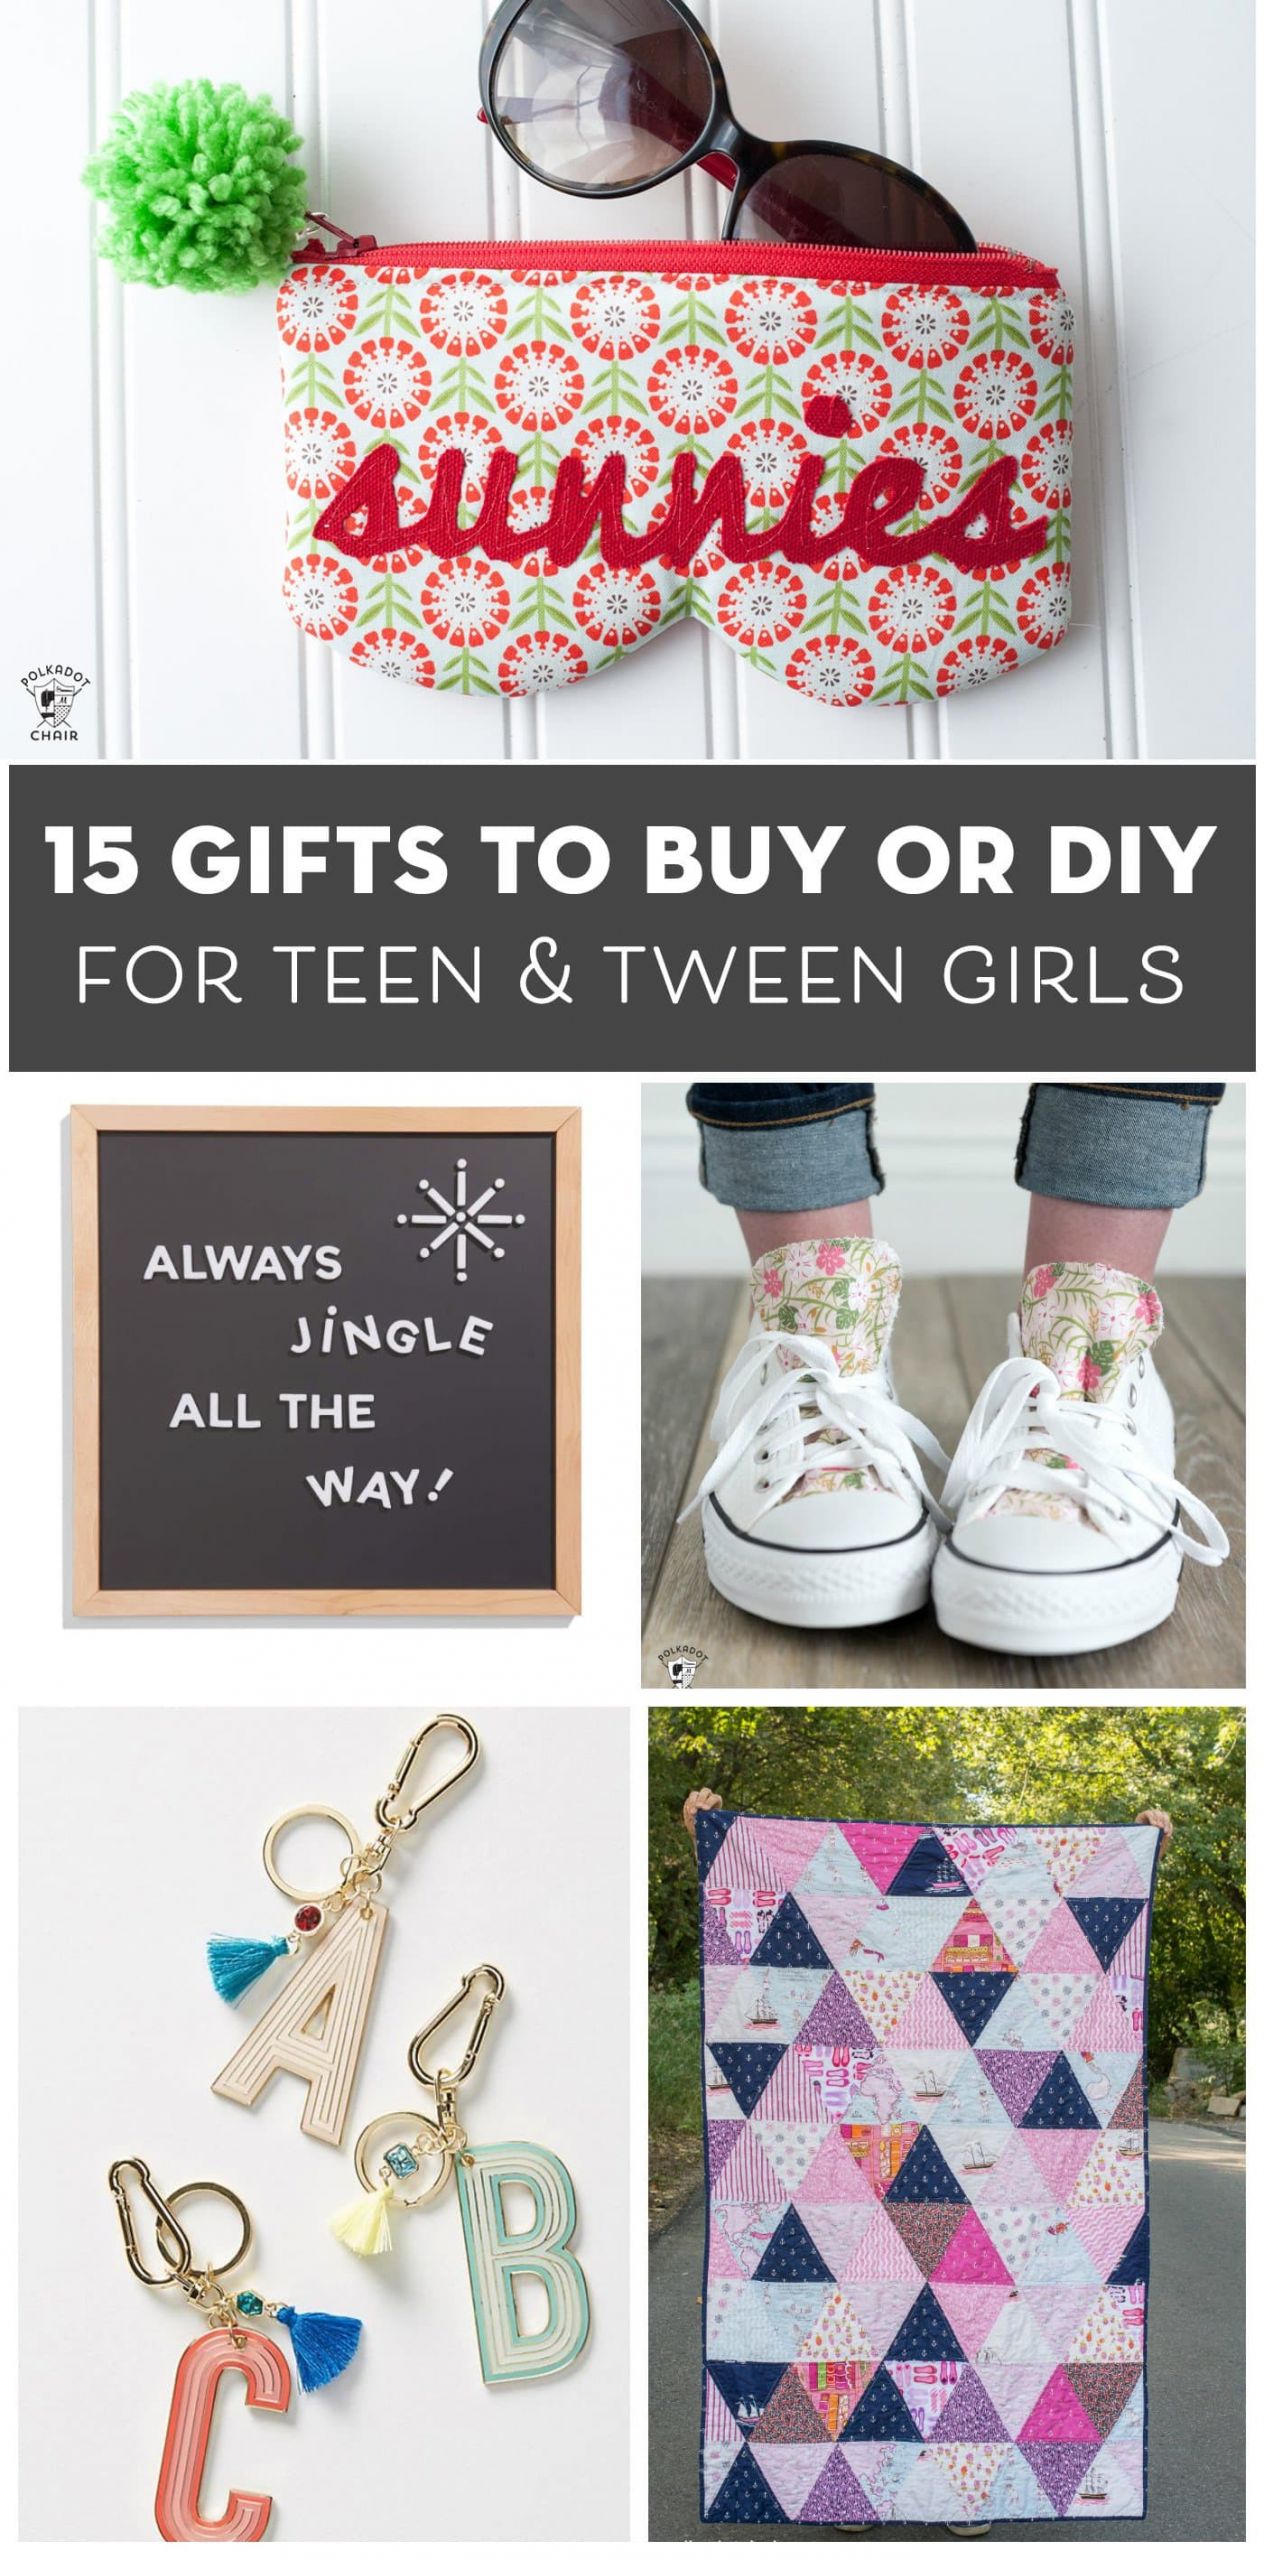 Gift Ideas For Girls
 15 Gift Ideas for Teenage Girls That You Can DIY or Buy